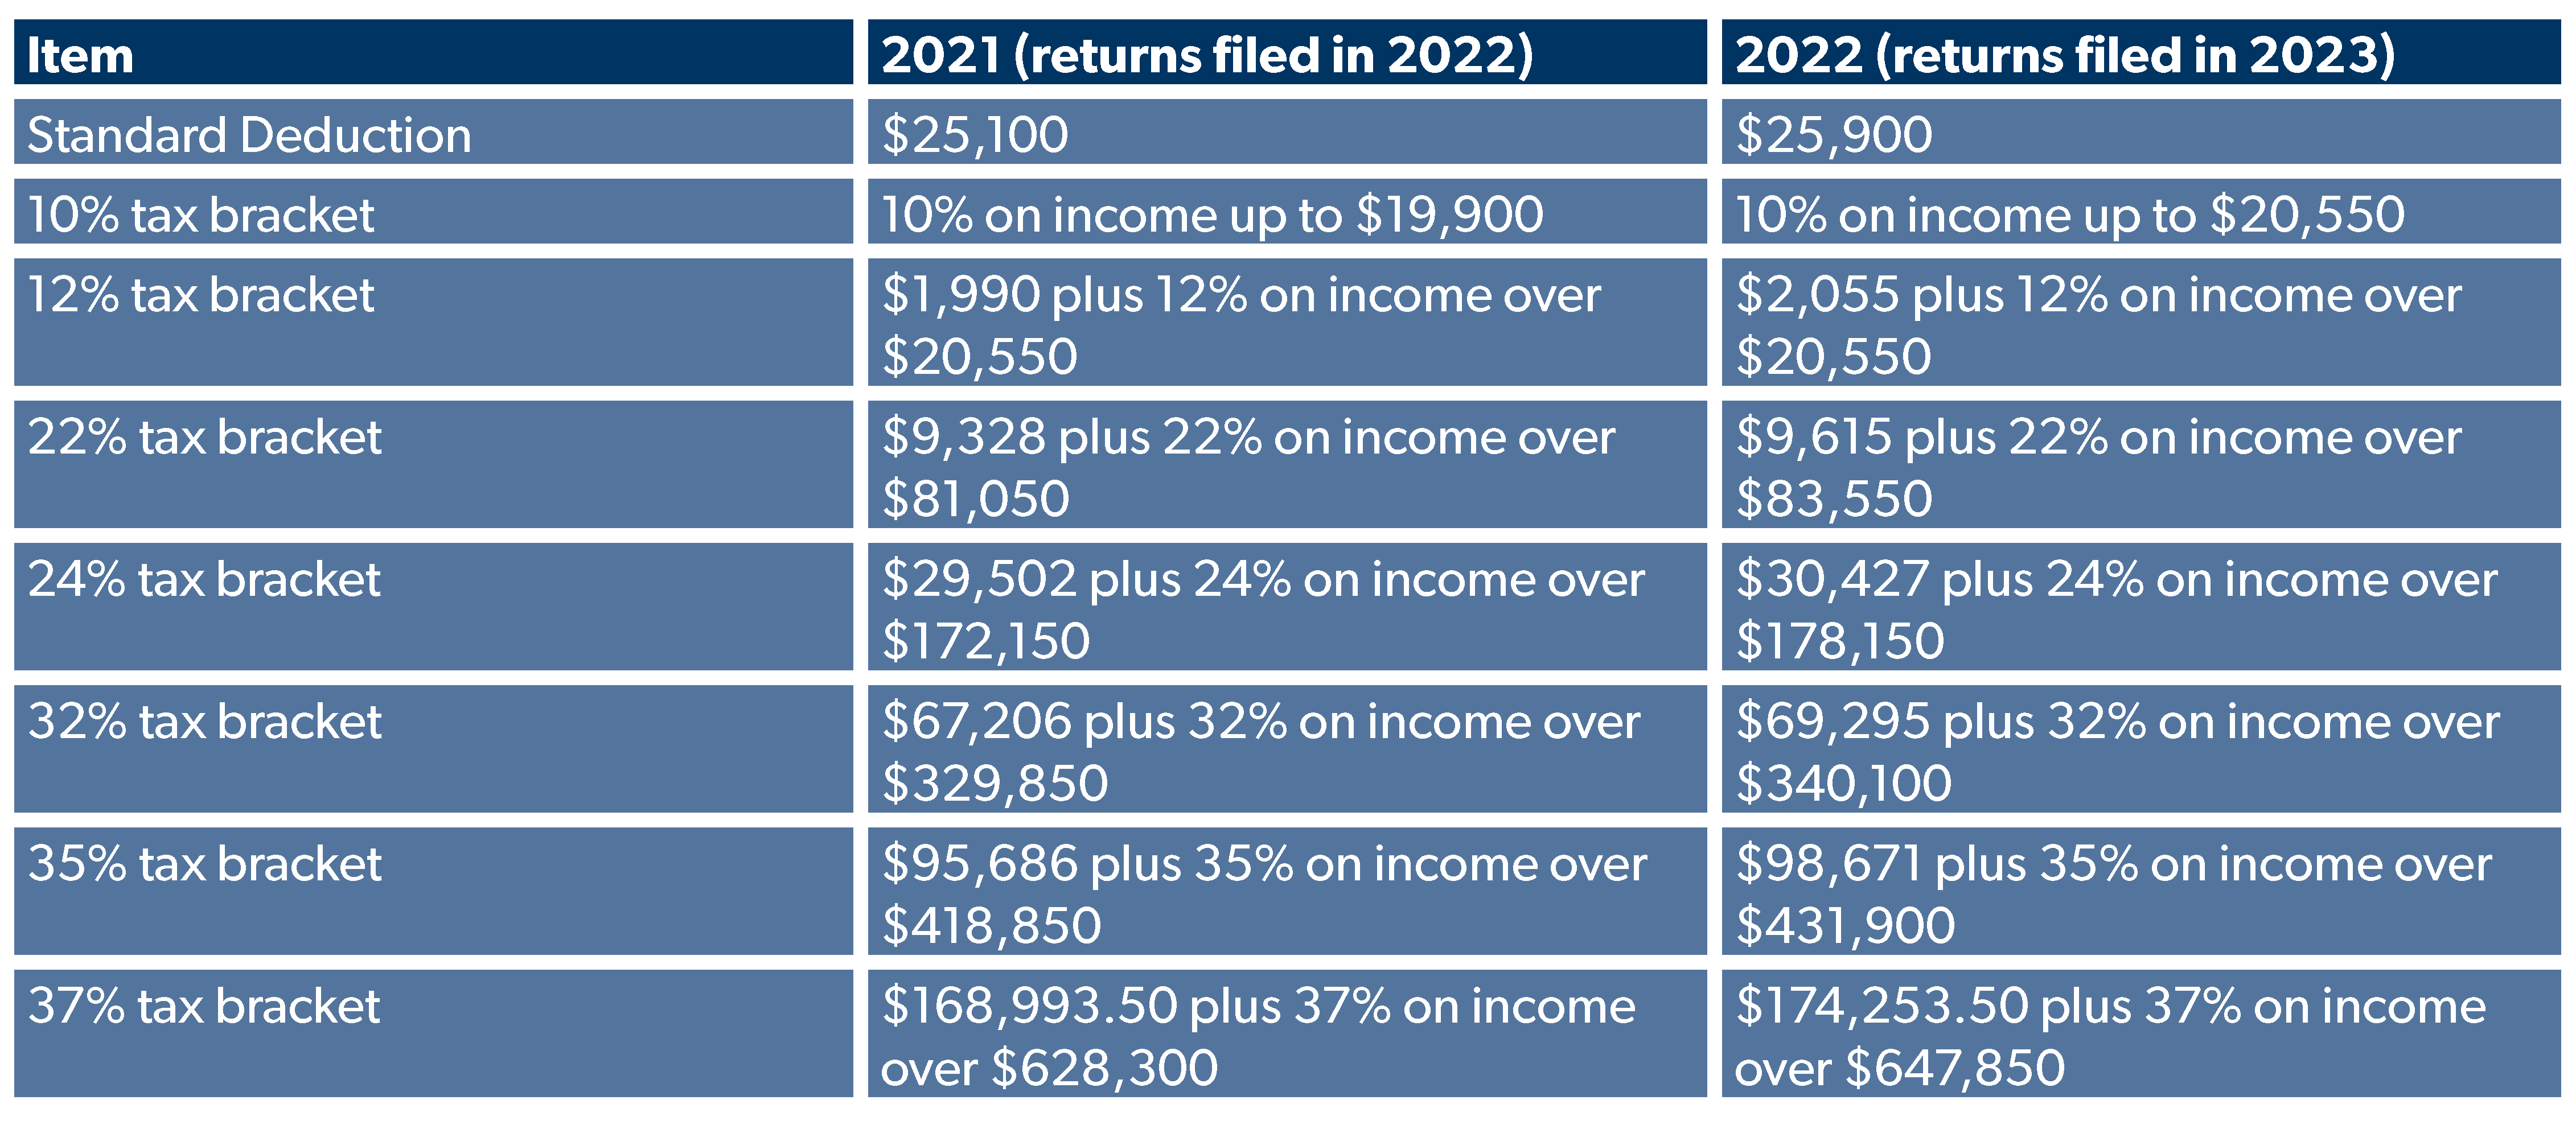 IRS Announces Inflation Adjustments to 2022 Tax Brackets The Economic